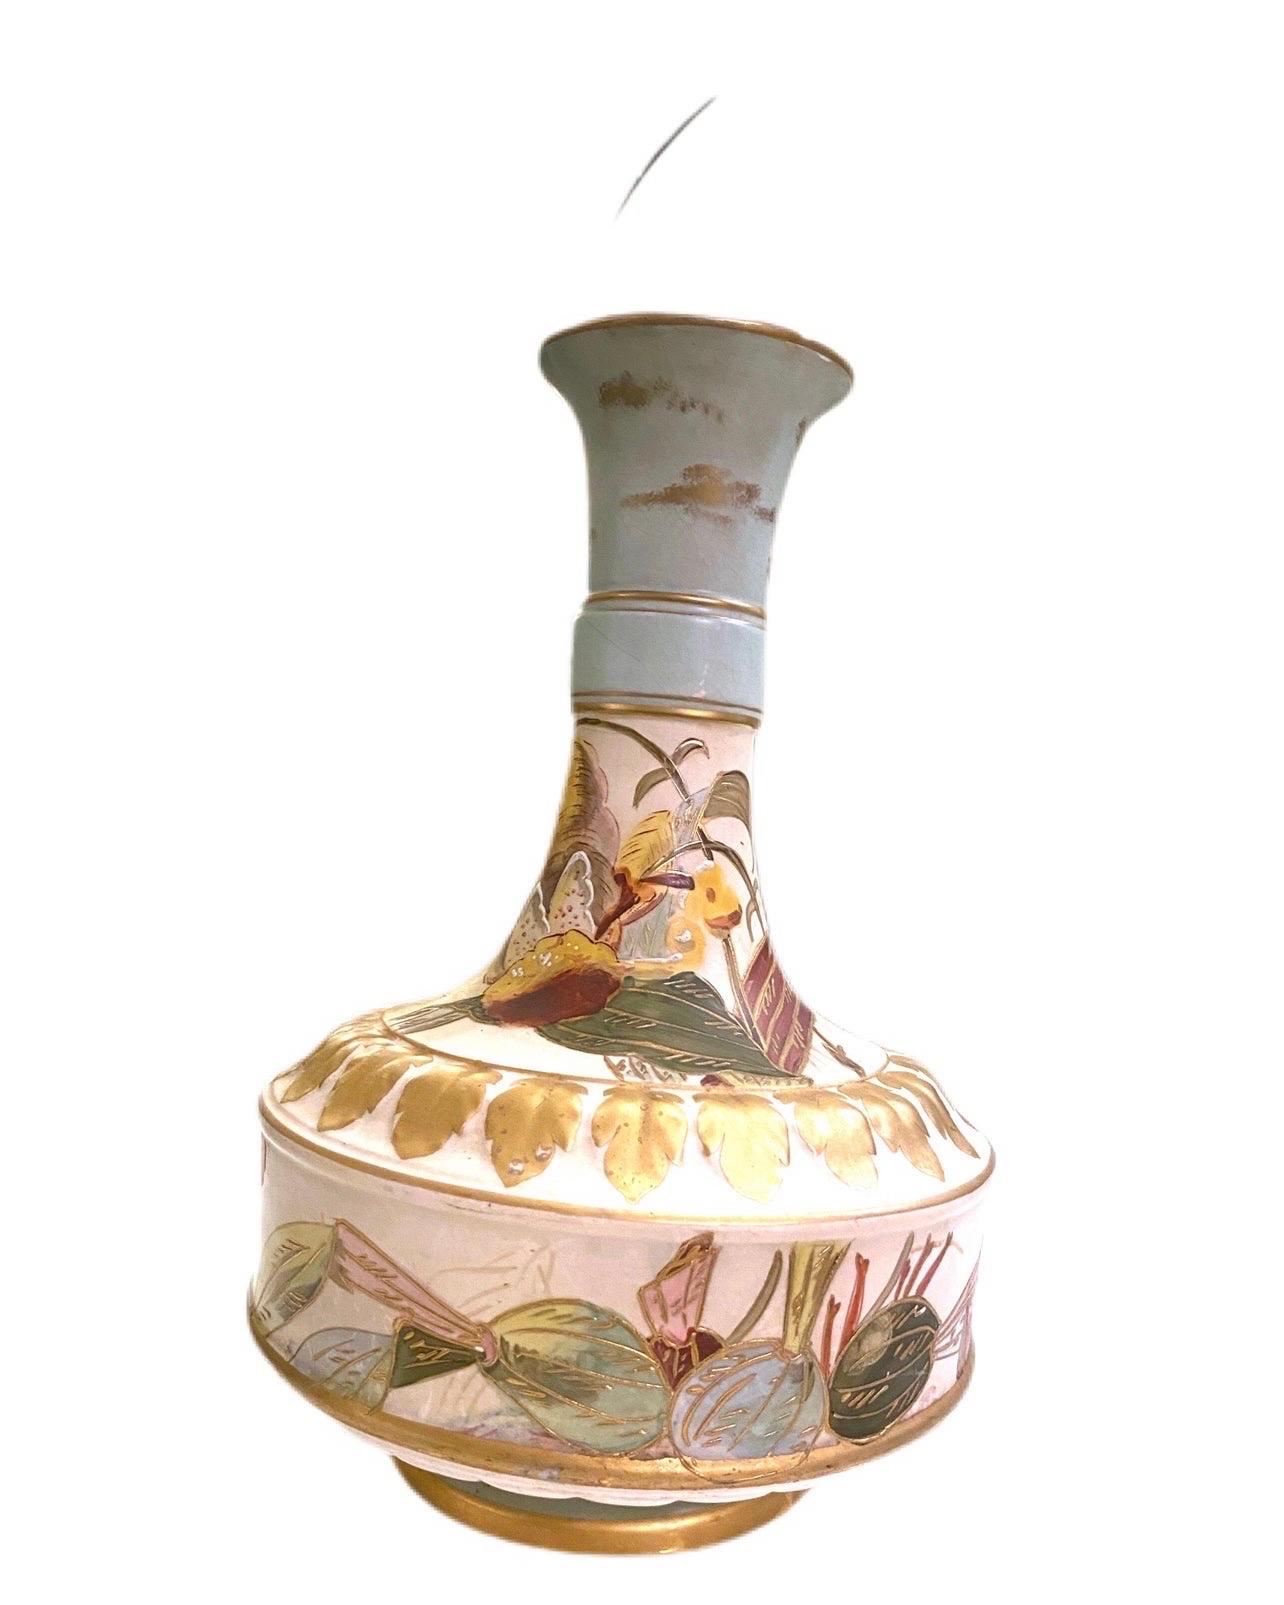 This beautiful vase is actually pretty big, with a large body and a tall slim neck. Hand painted with gold leaf details throughout. Words I thought I would never say... gorgeous onions painted around the lower base. Flowers surround the neck snd a